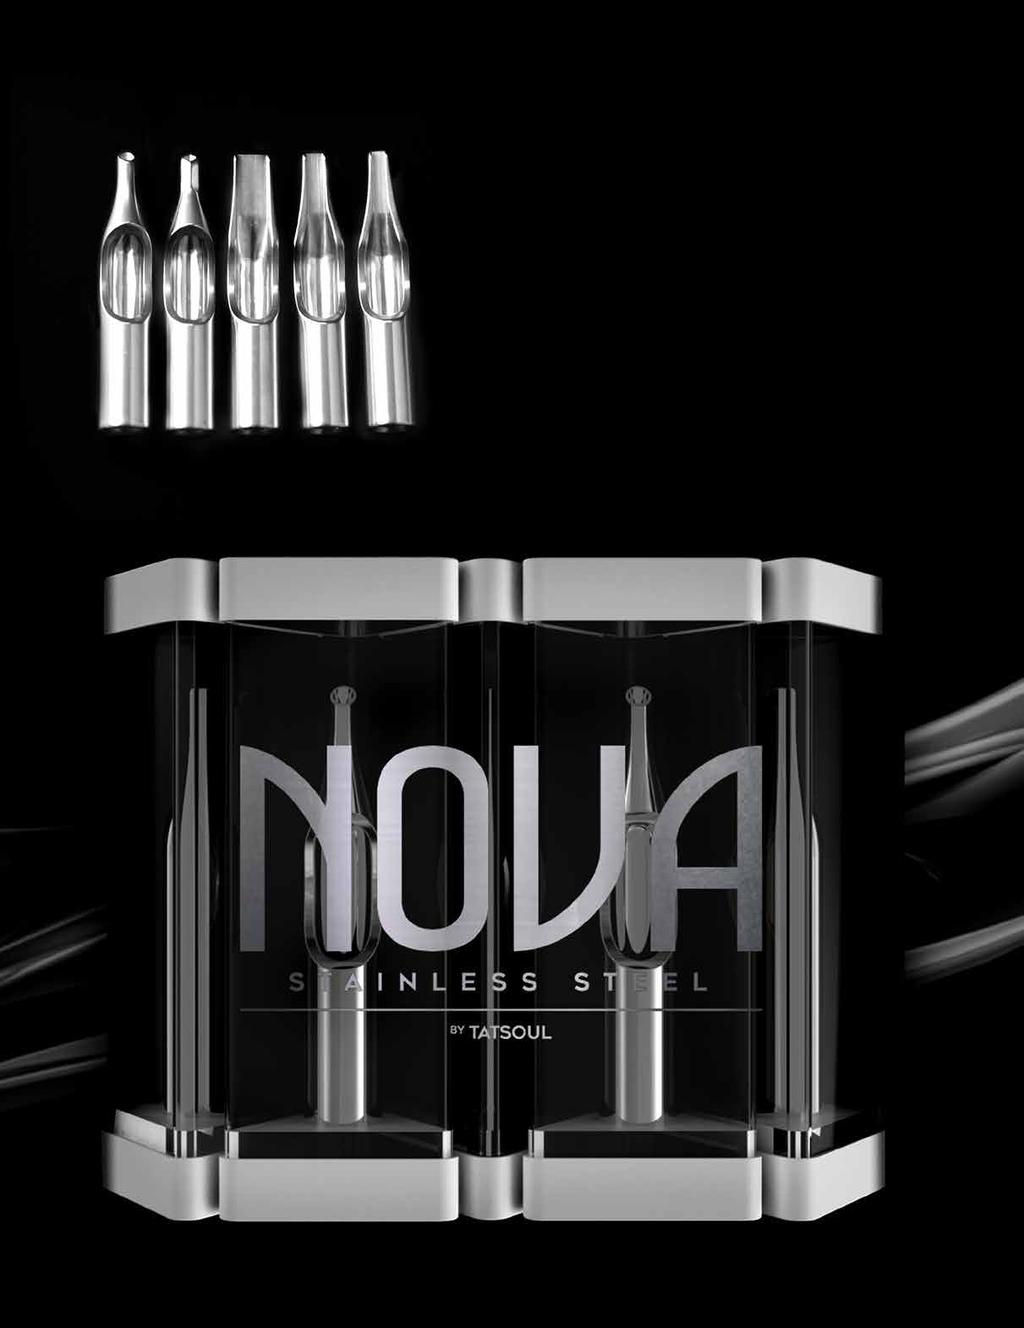 Noble, quiet in refinement, and an effortless perfection, the Nova Stainless Steel tips fulfills all artists needs.